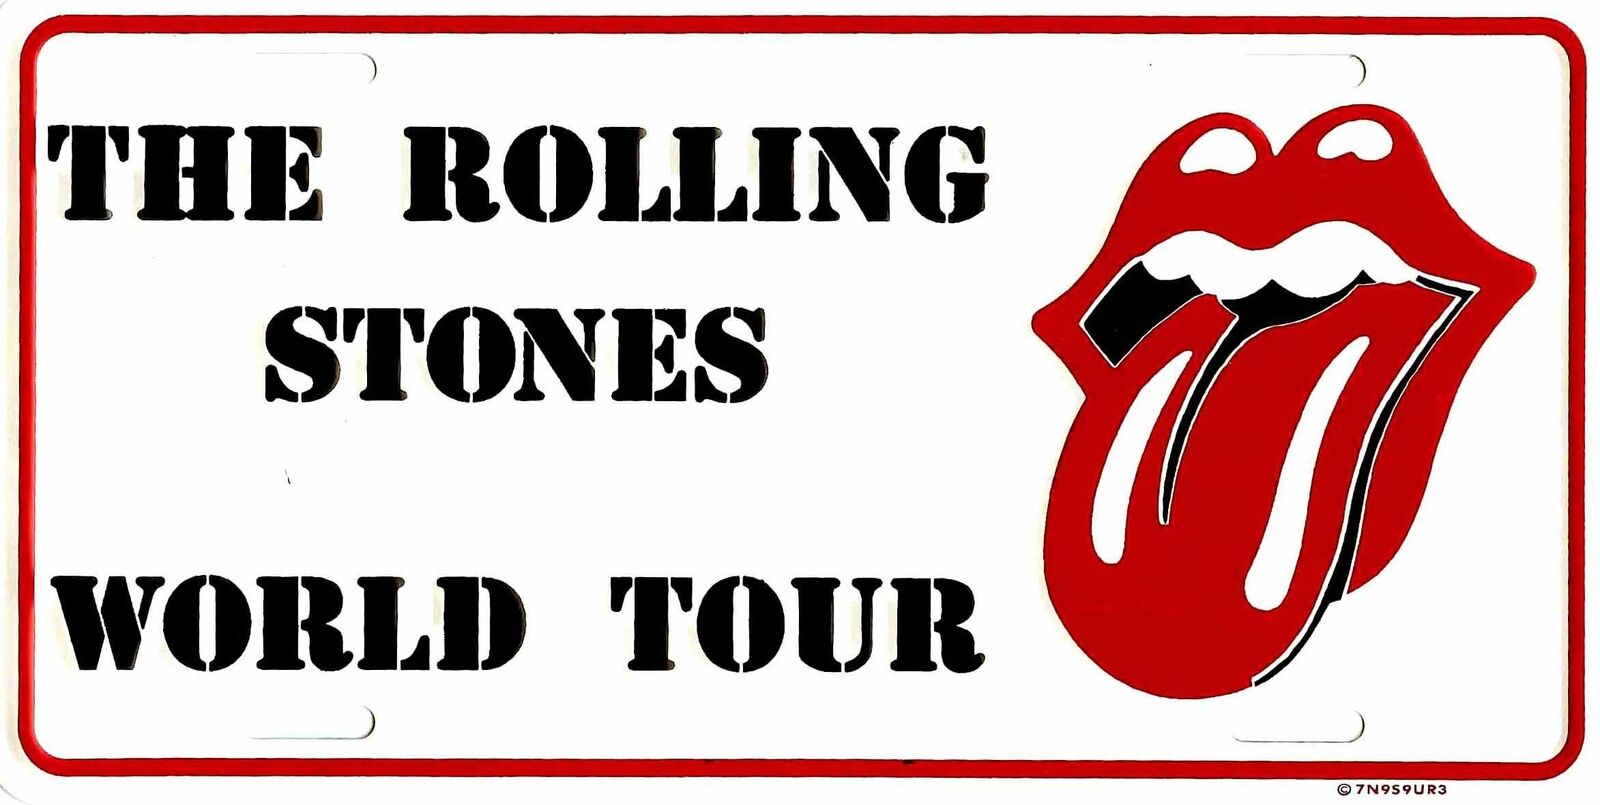 NEW OLD STOCK ROLLING STONES METAL LICENSE PLATE AUTO TAG EMBOSSED NUMBER #554